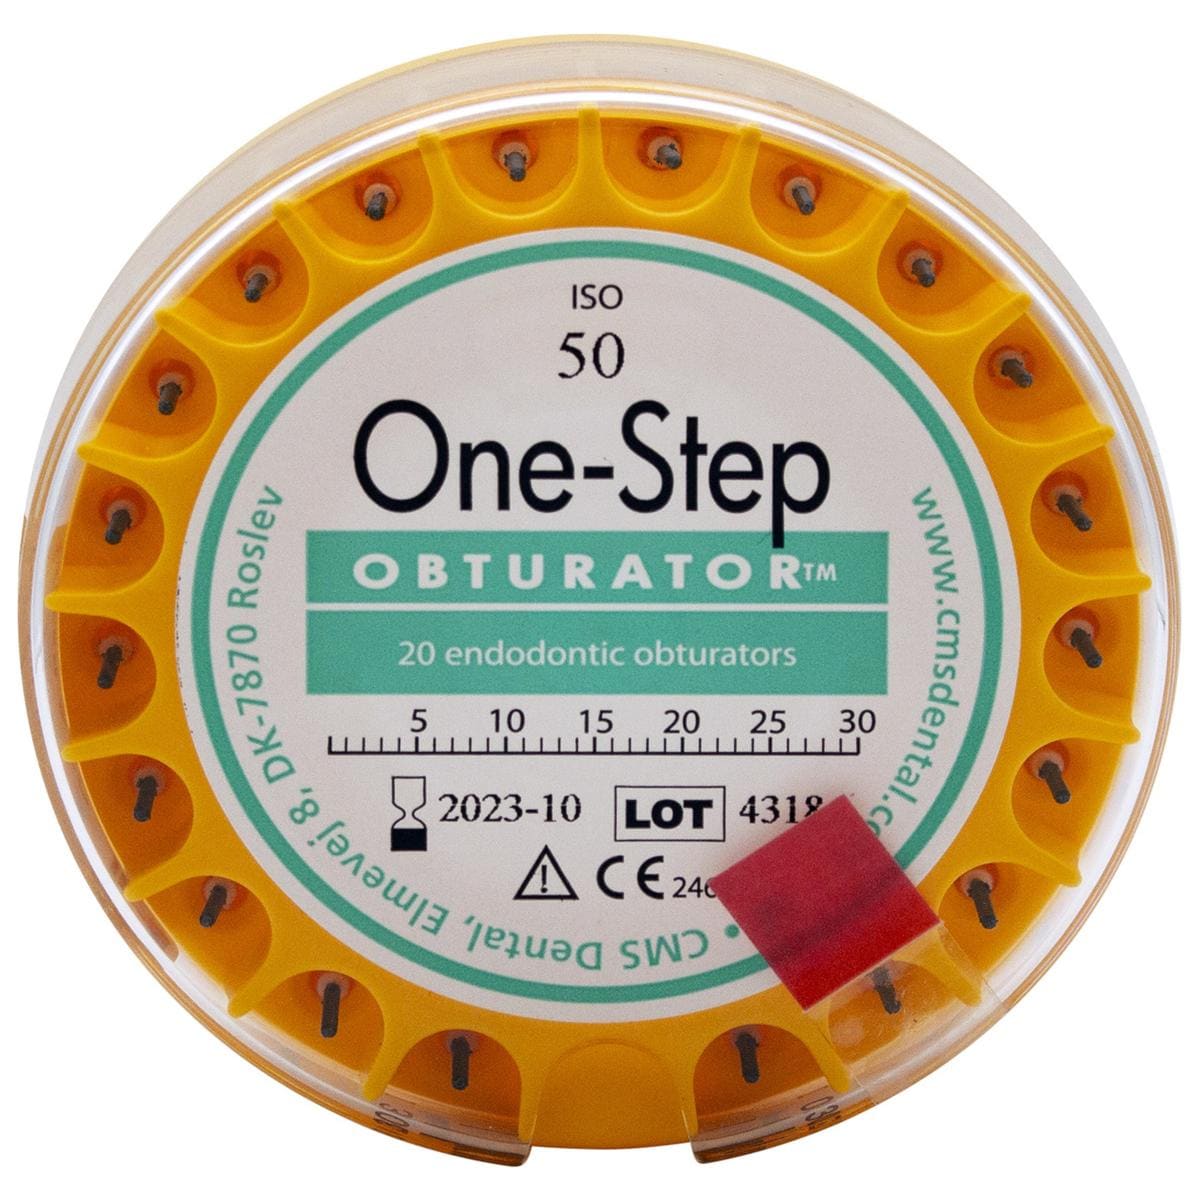 Obturateur One-Step - ISO 050, jaune